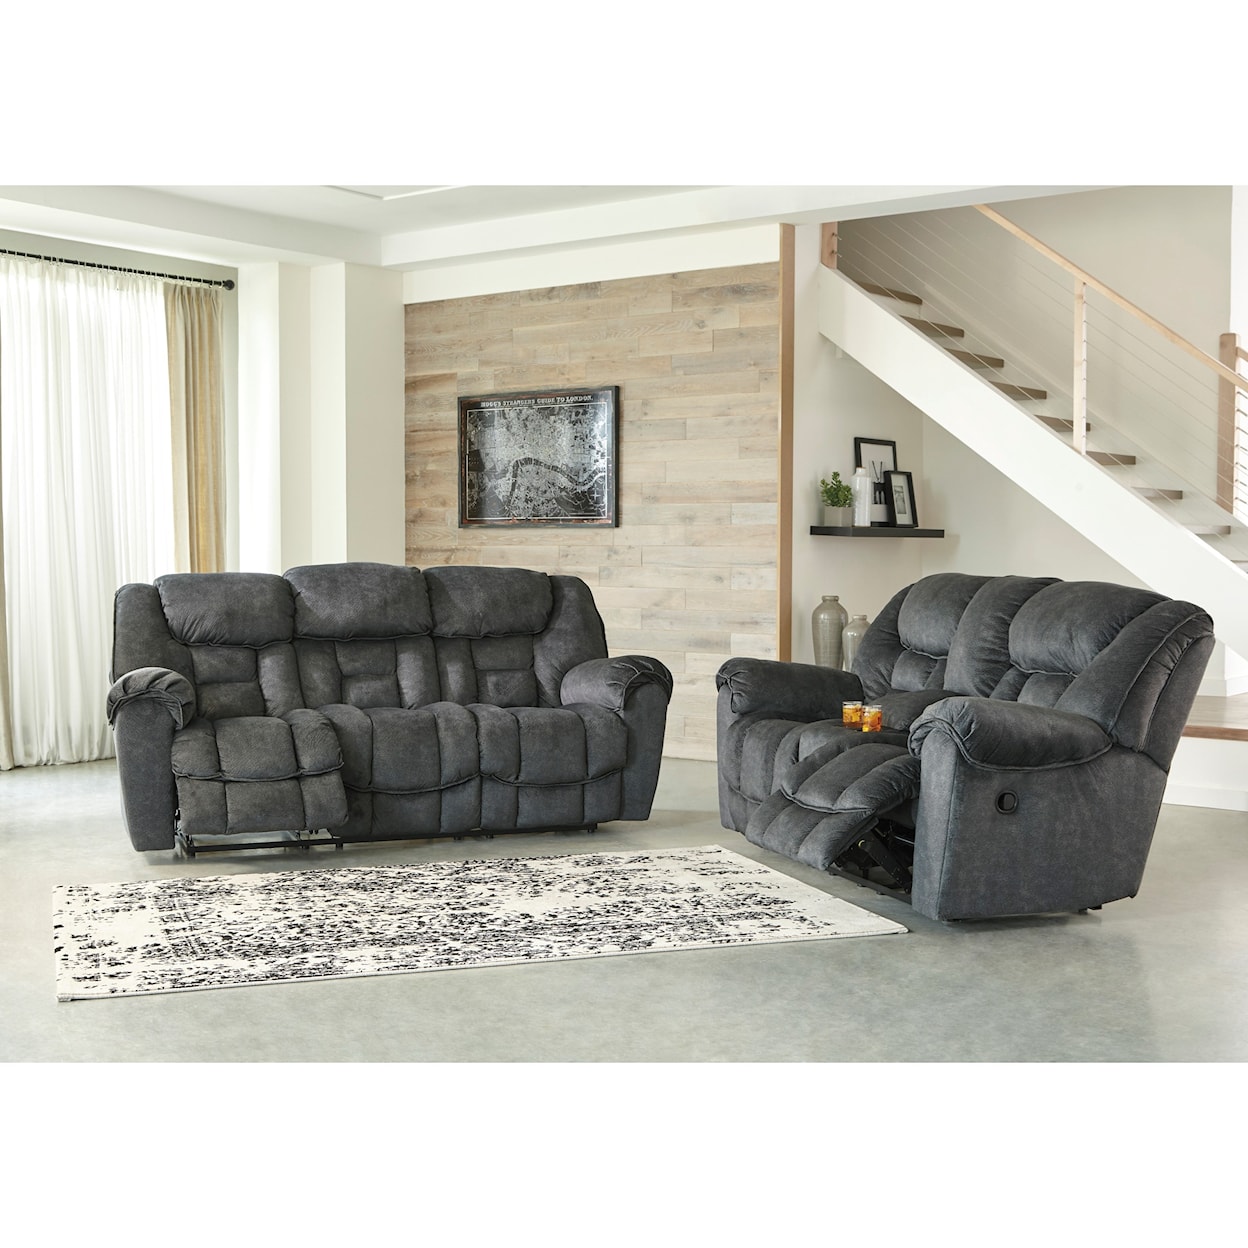 Signature Design by Ashley Furniture Capehorn Reclining Living Room Group